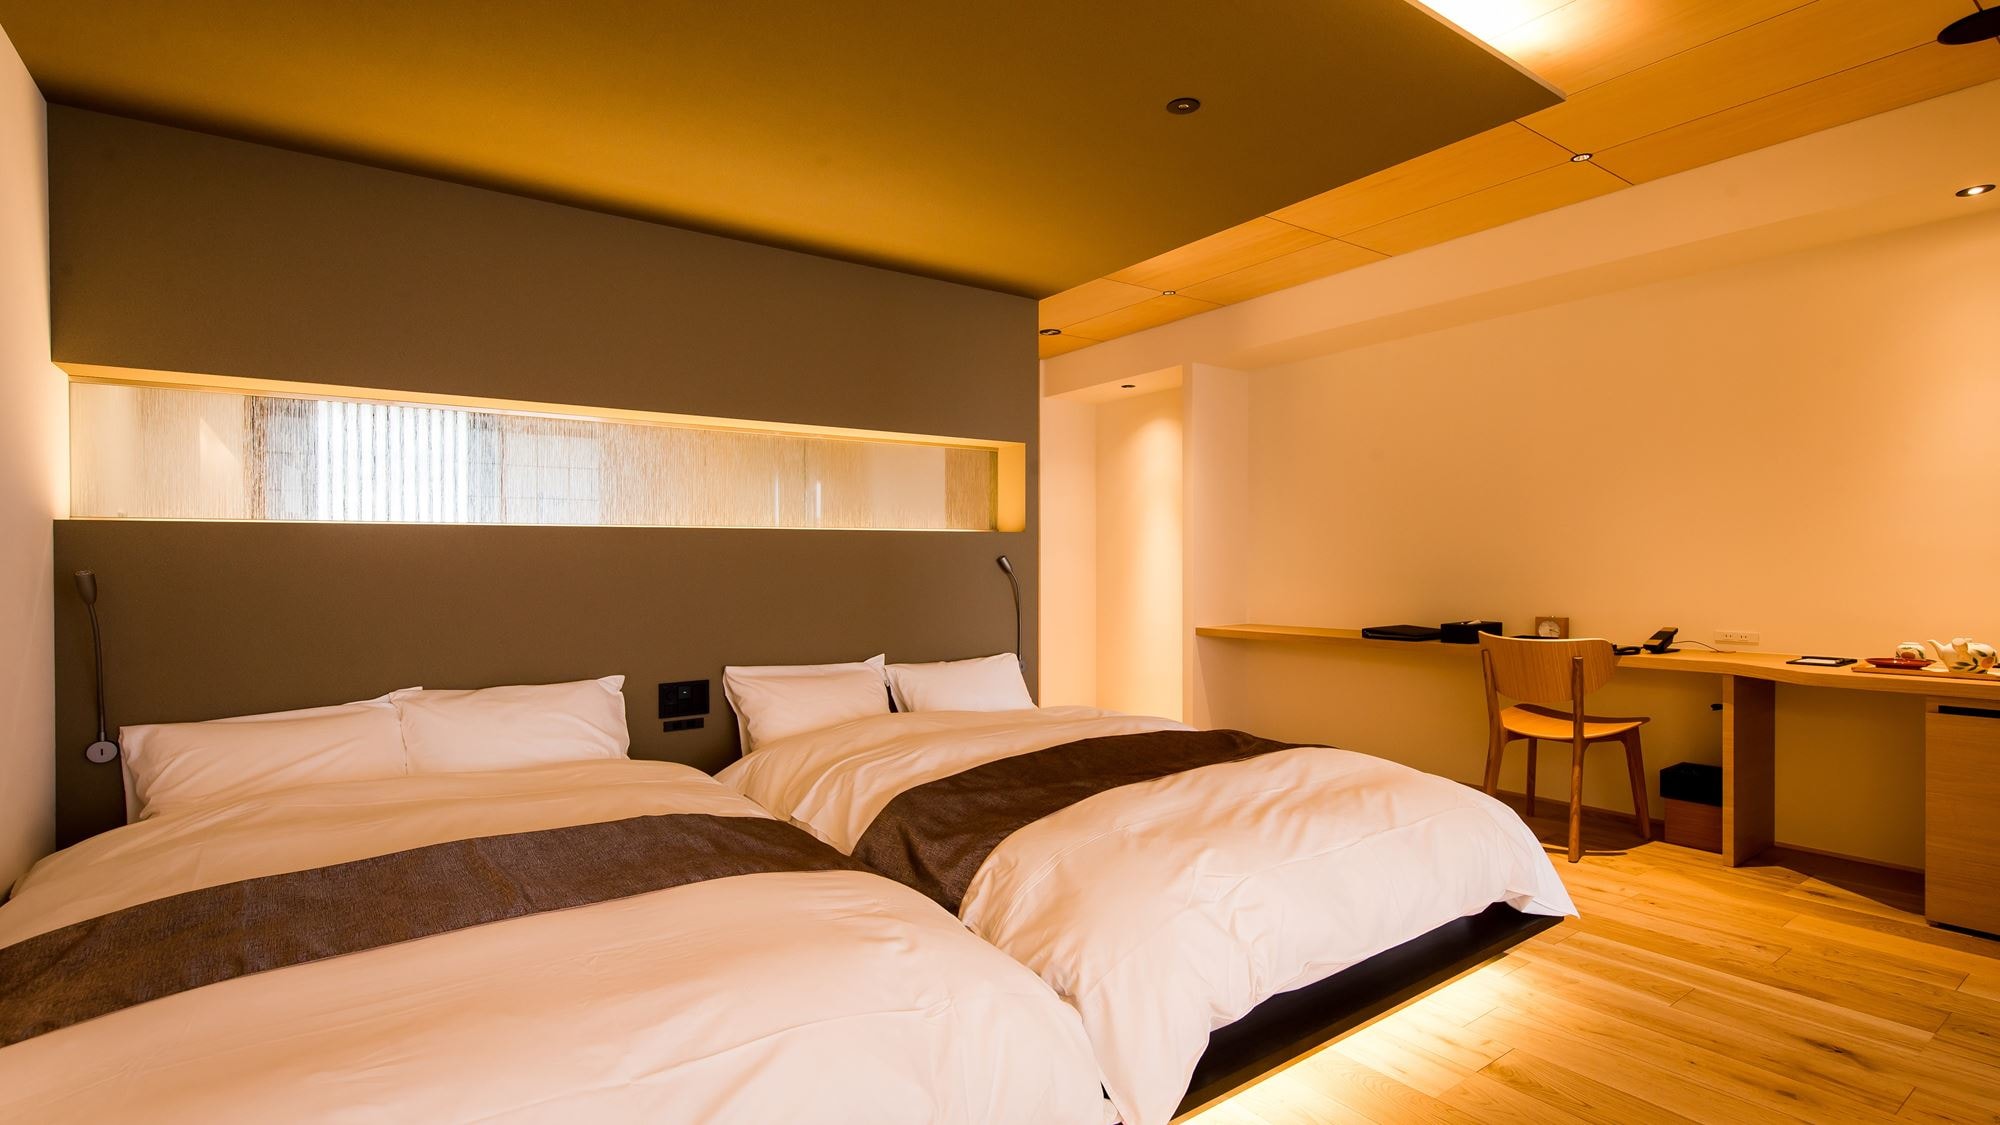 ◆ Example of guest room Superior ◆